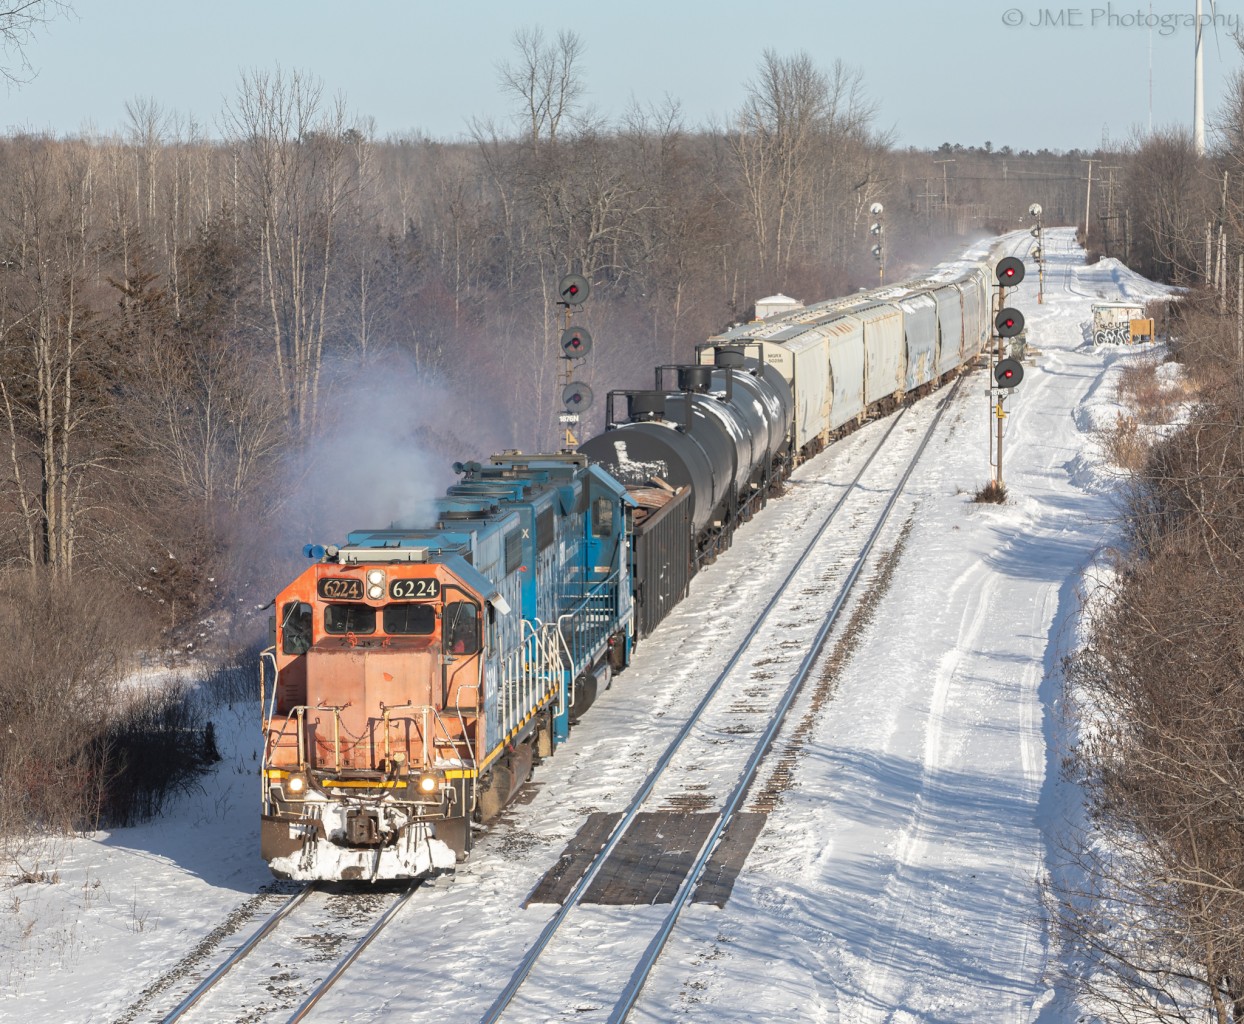 CN L518 heads back towards Belleville with the GTW GP38-2 leading this time. After a long and hard days work, they’re finally headed back but only doing 25 mph, since they have problems with the SBU.